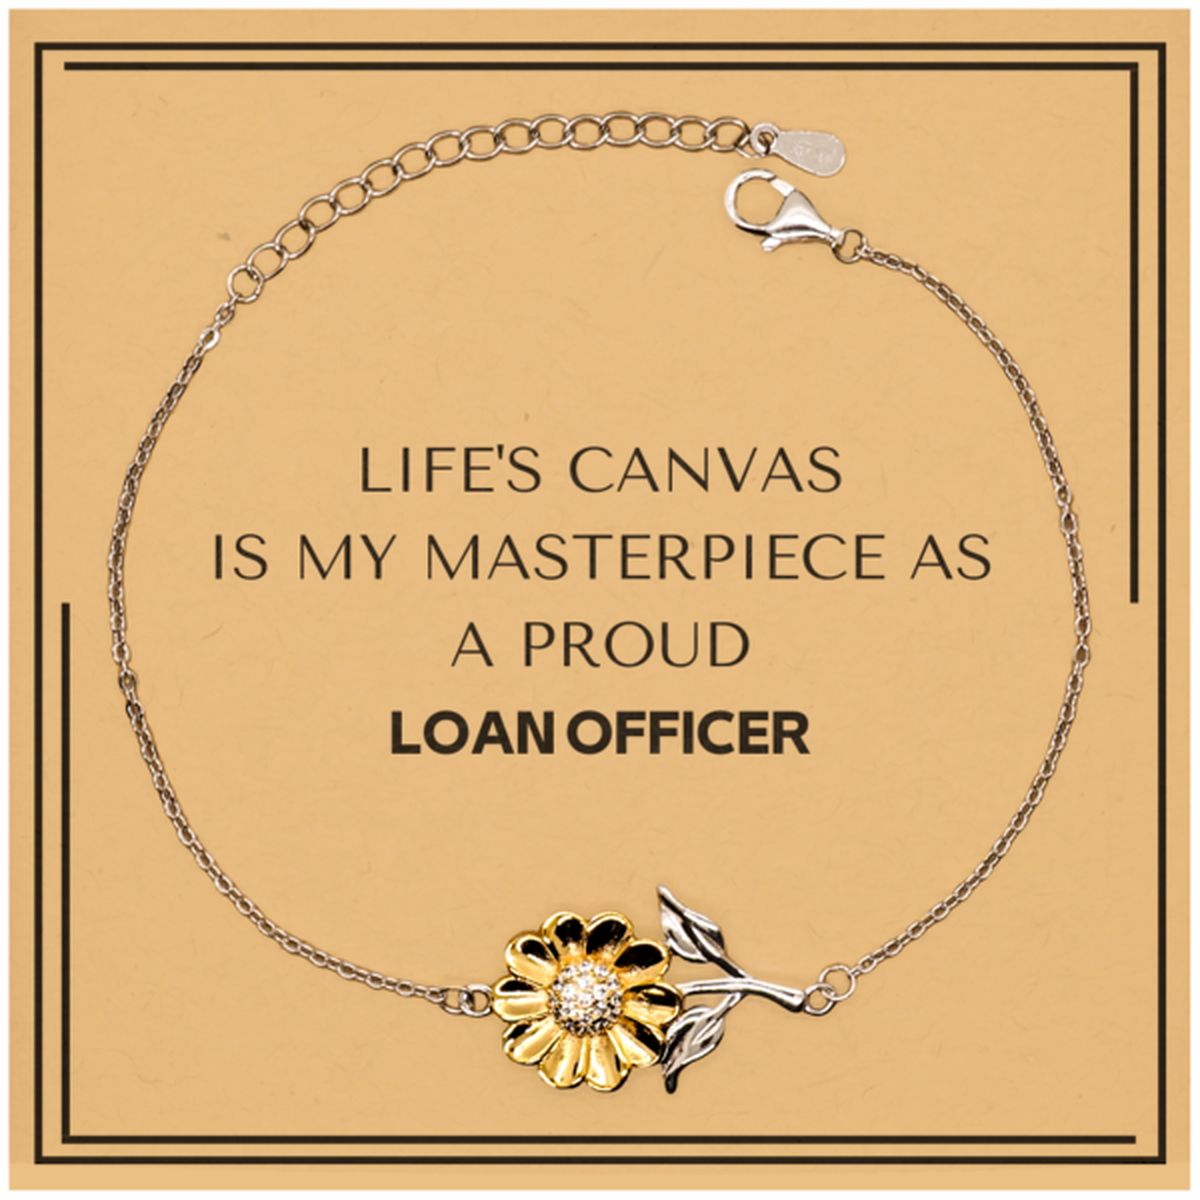 Proud Loan Officer Gifts, Life's canvas is my masterpiece, Epic Birthday Christmas Unique Sunflower Bracelet For Loan Officer, Coworkers, Men, Women, Friends